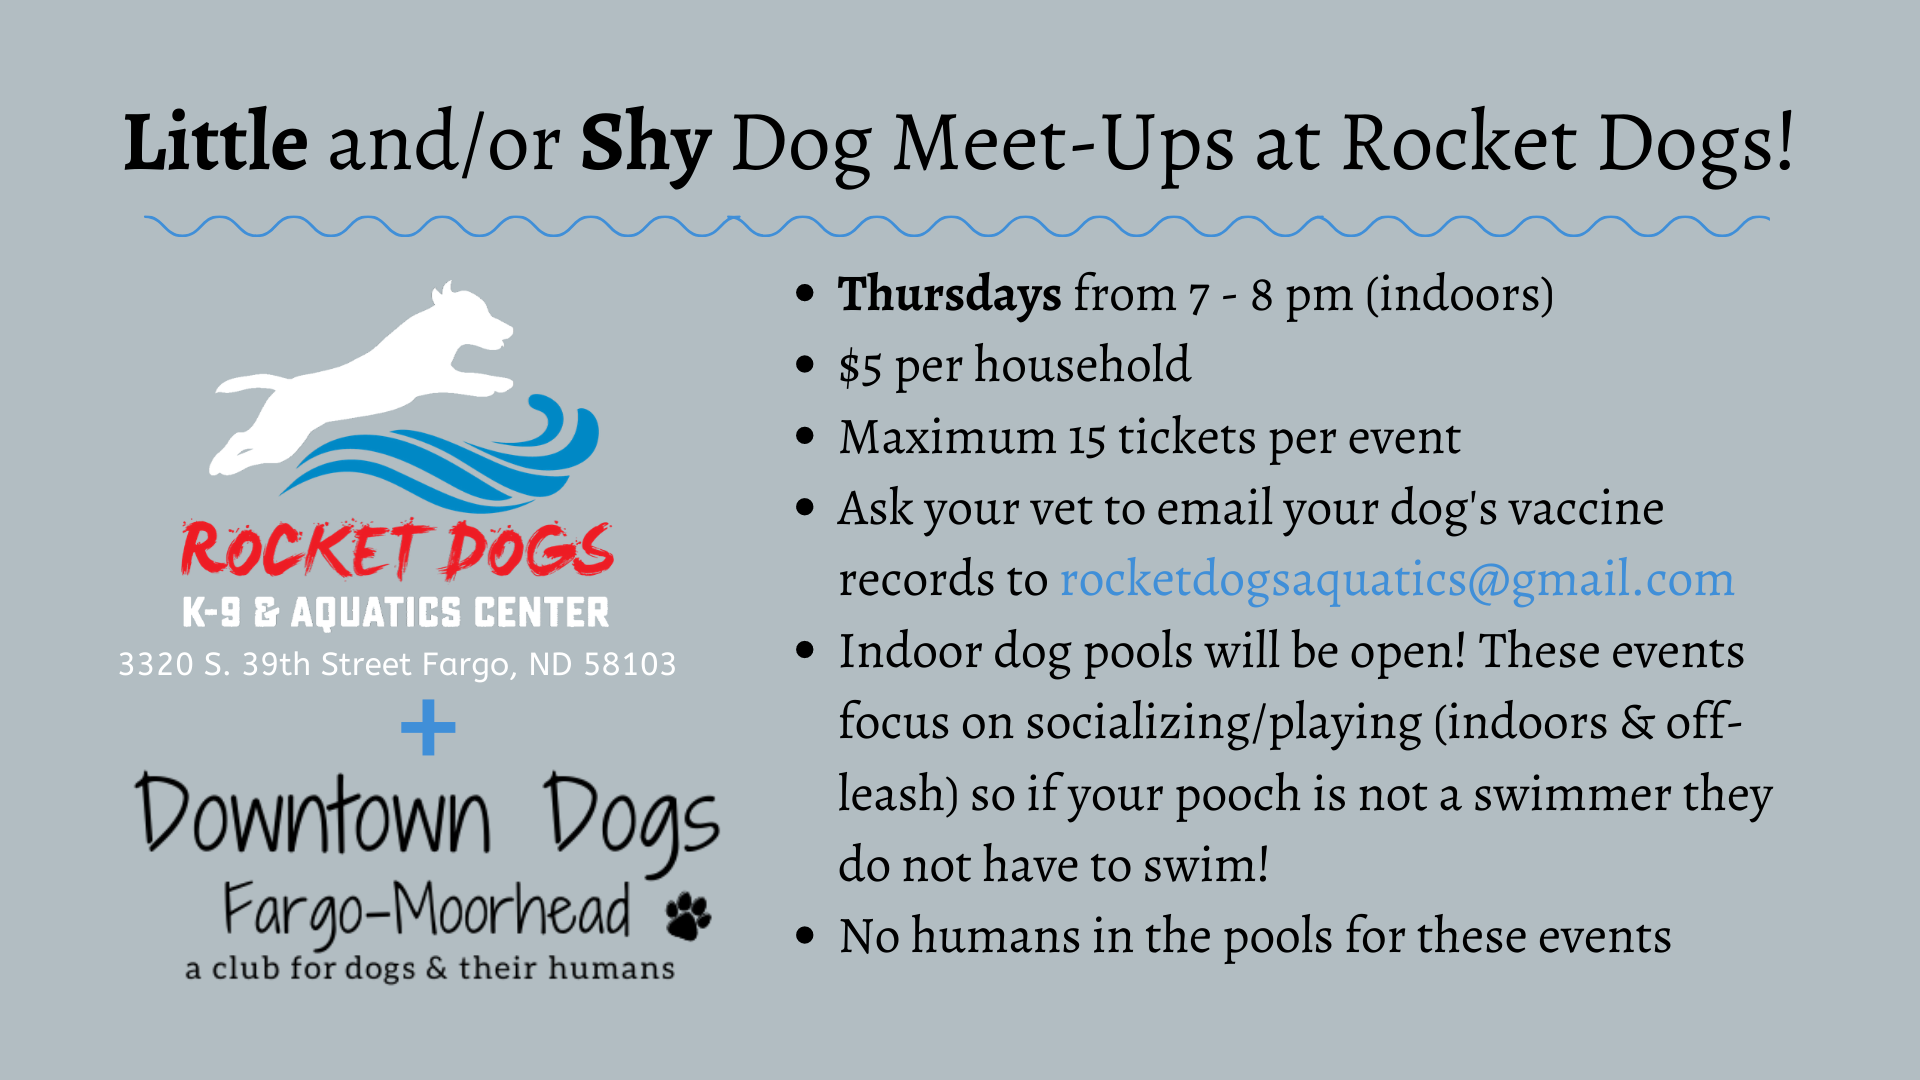 Little and/or Shy Dog Meet-Ups at Rocket Dogs!